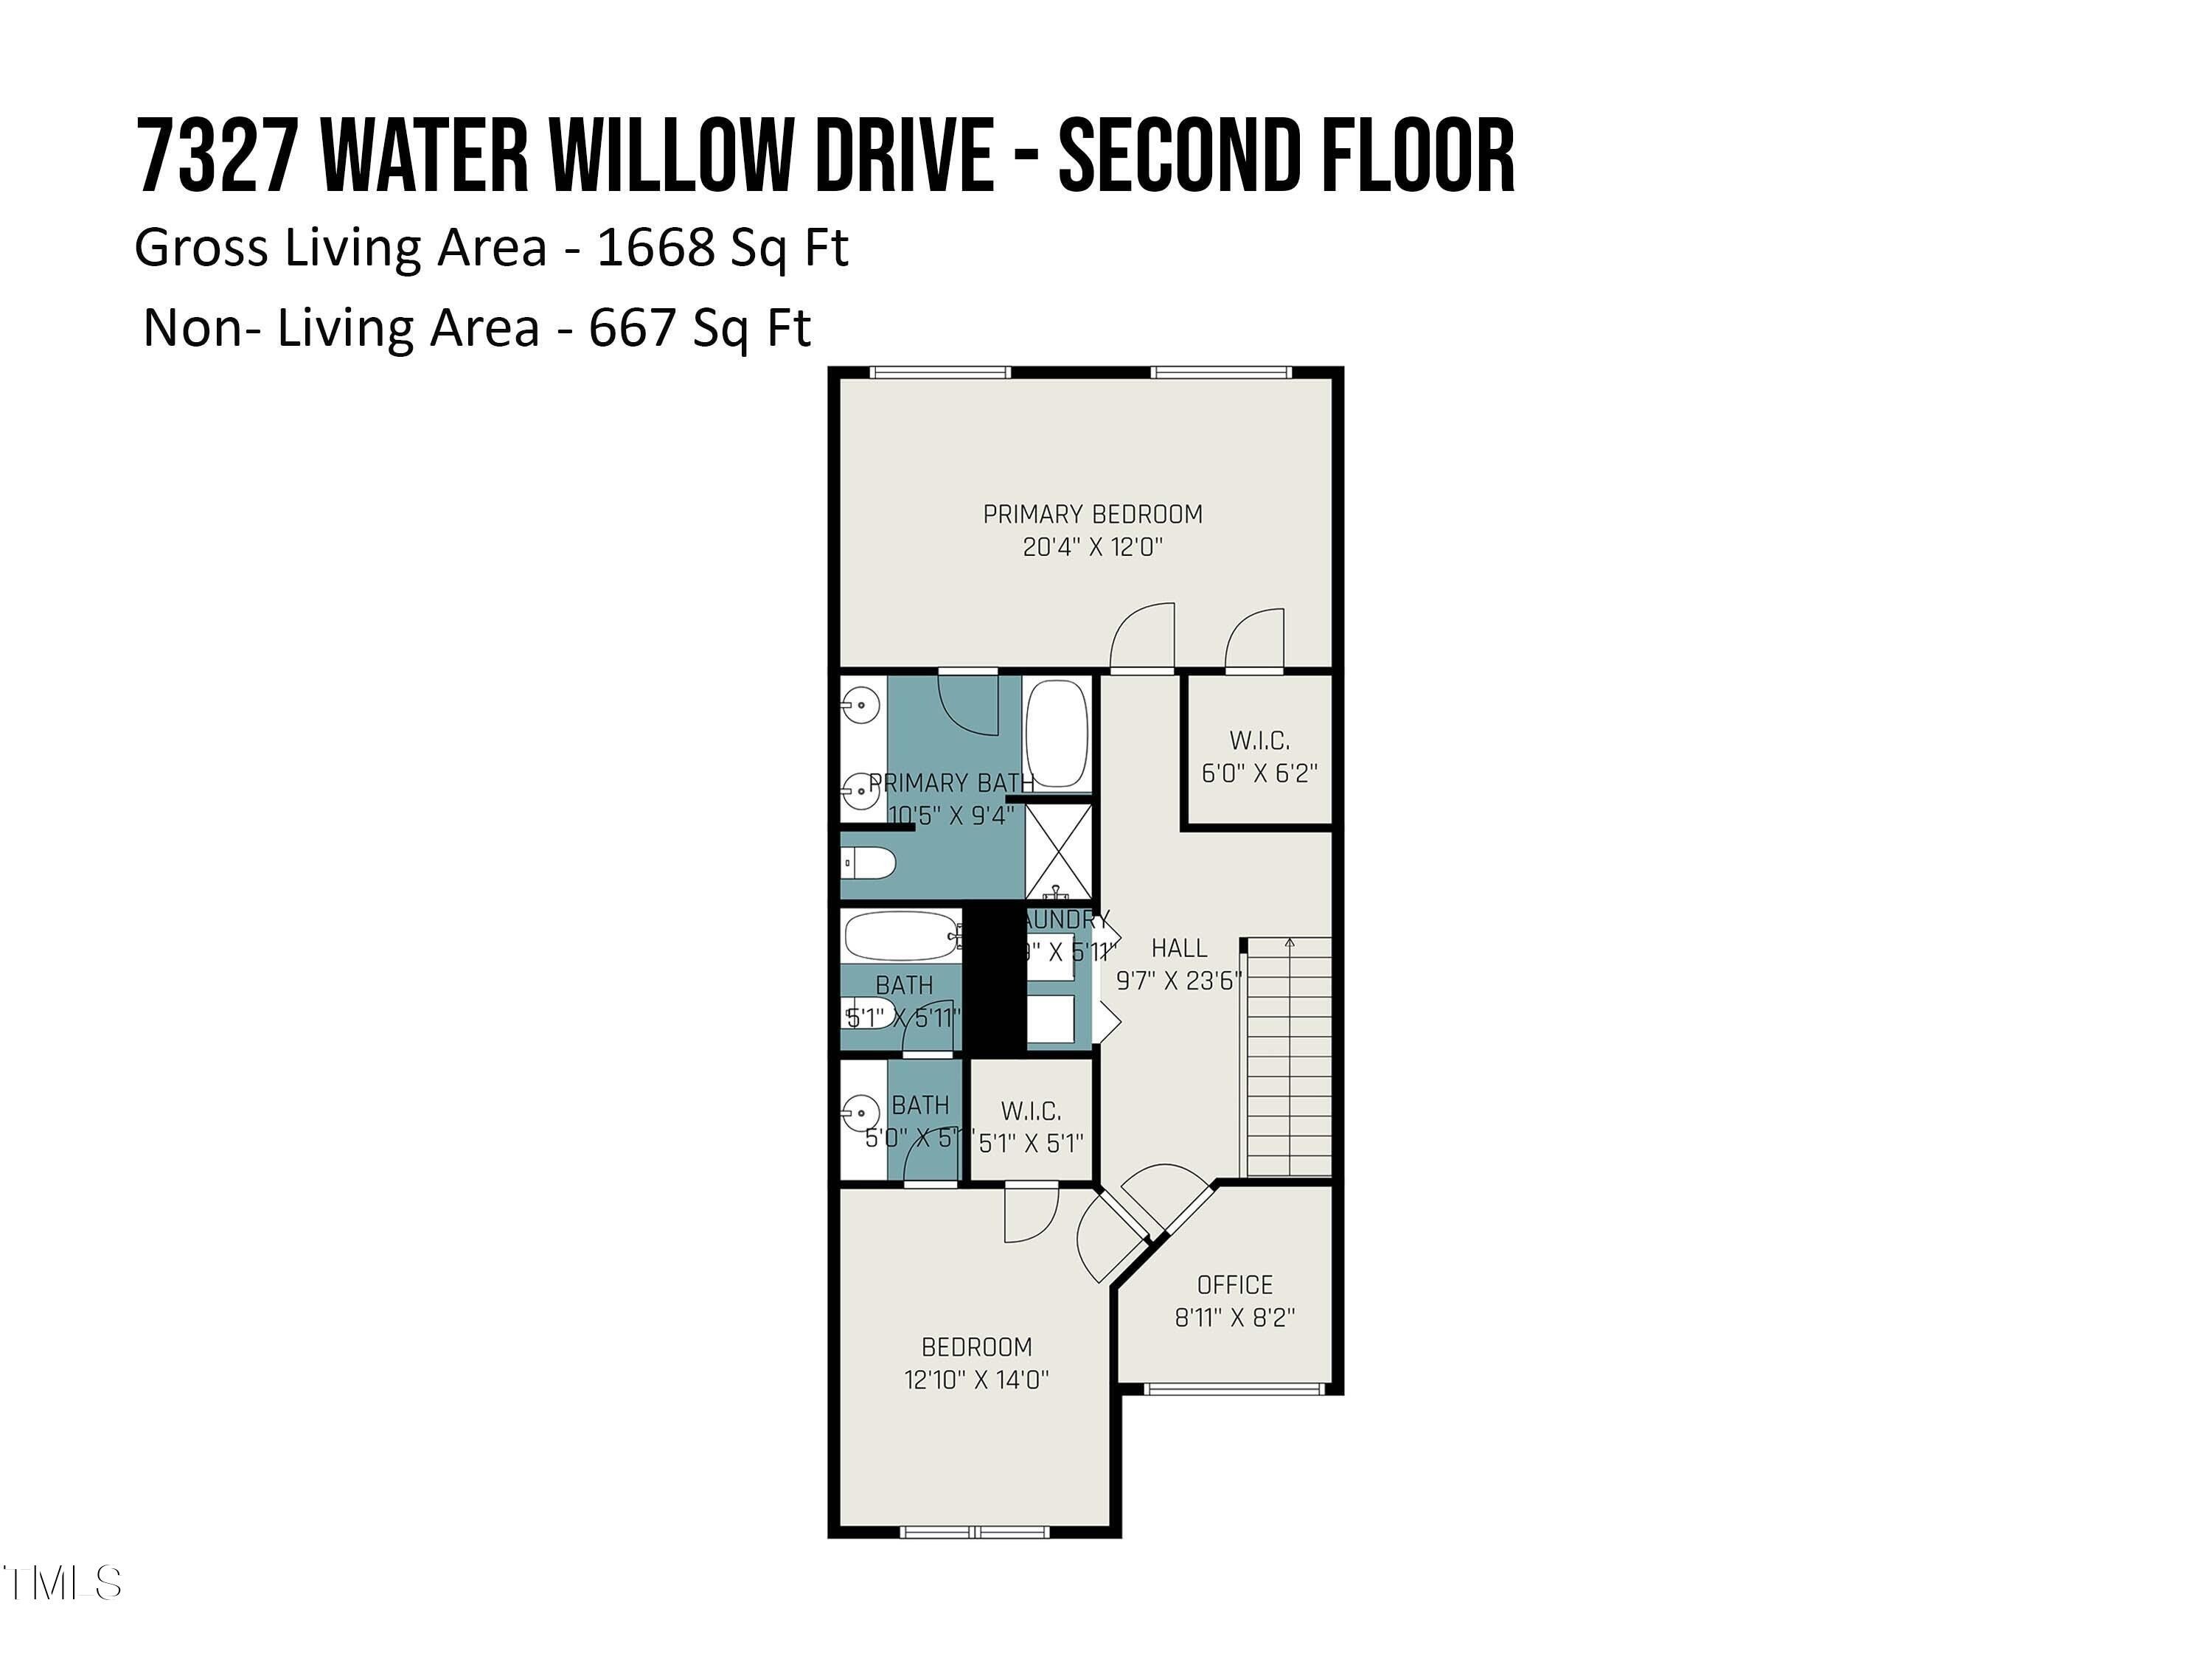 26. 7327 Water Willow Drive